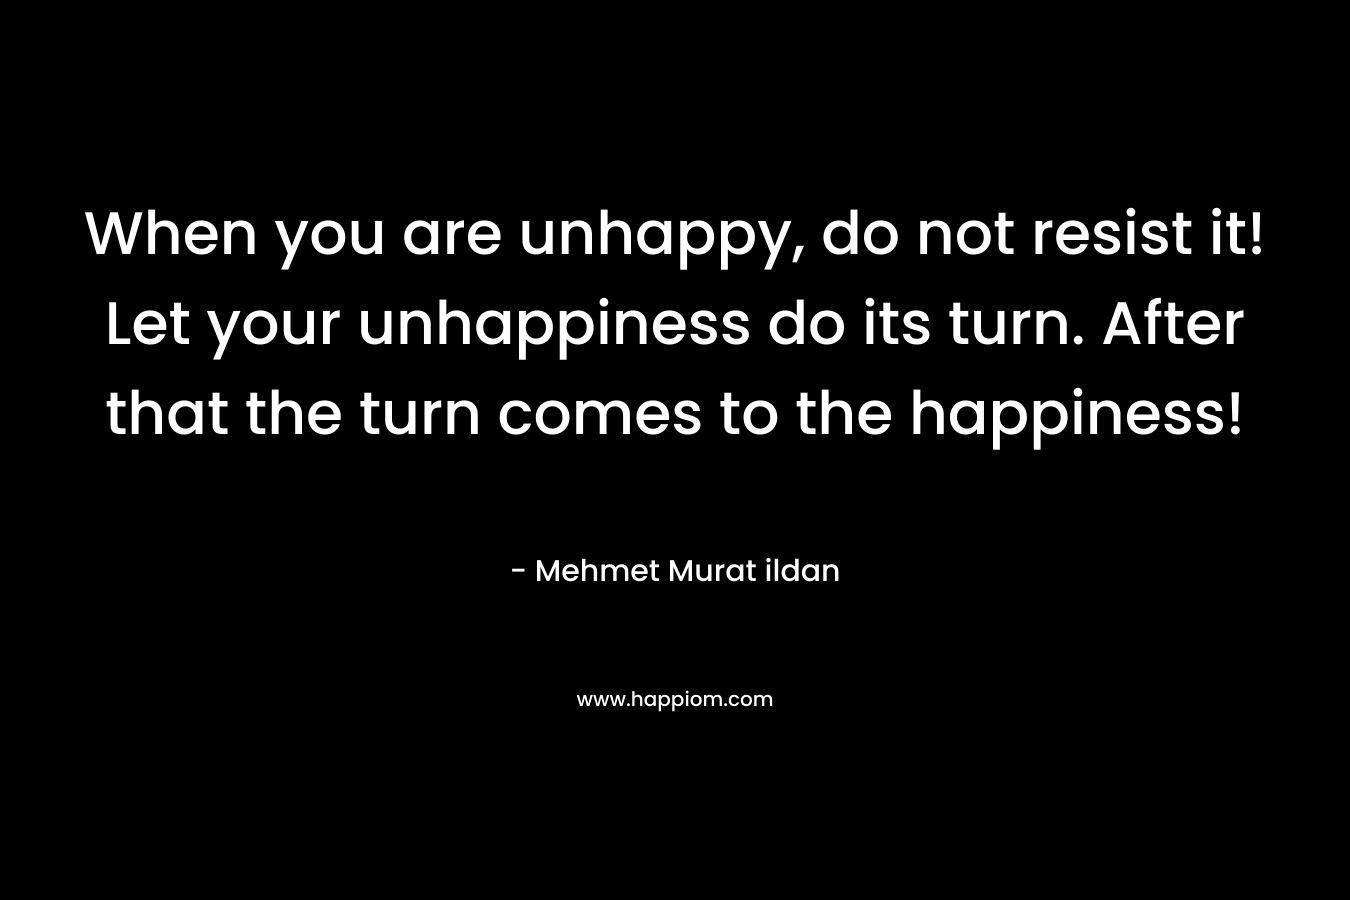 When you are unhappy, do not resist it! Let your unhappiness do its turn. After that the turn comes to the happiness! – Mehmet Murat ildan